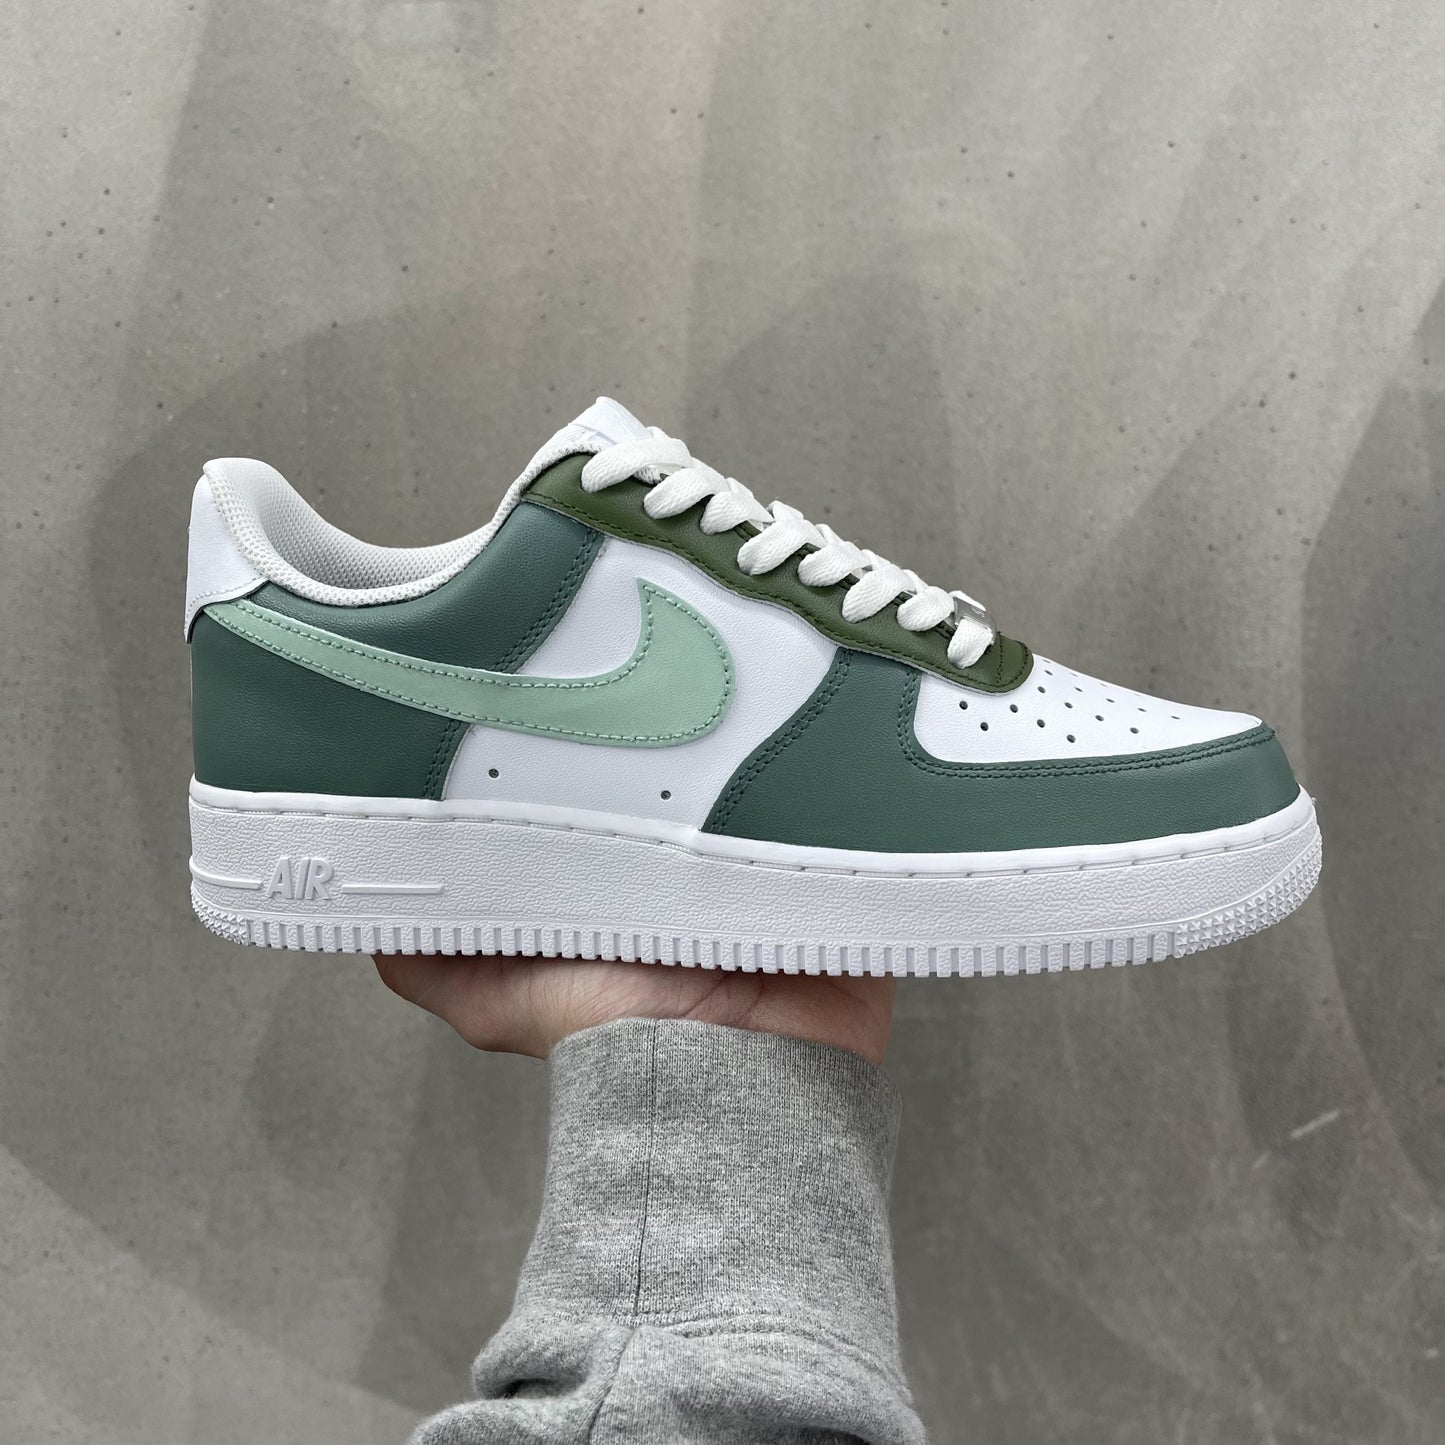 Custom AIR FORCE 1 - Forest vibe